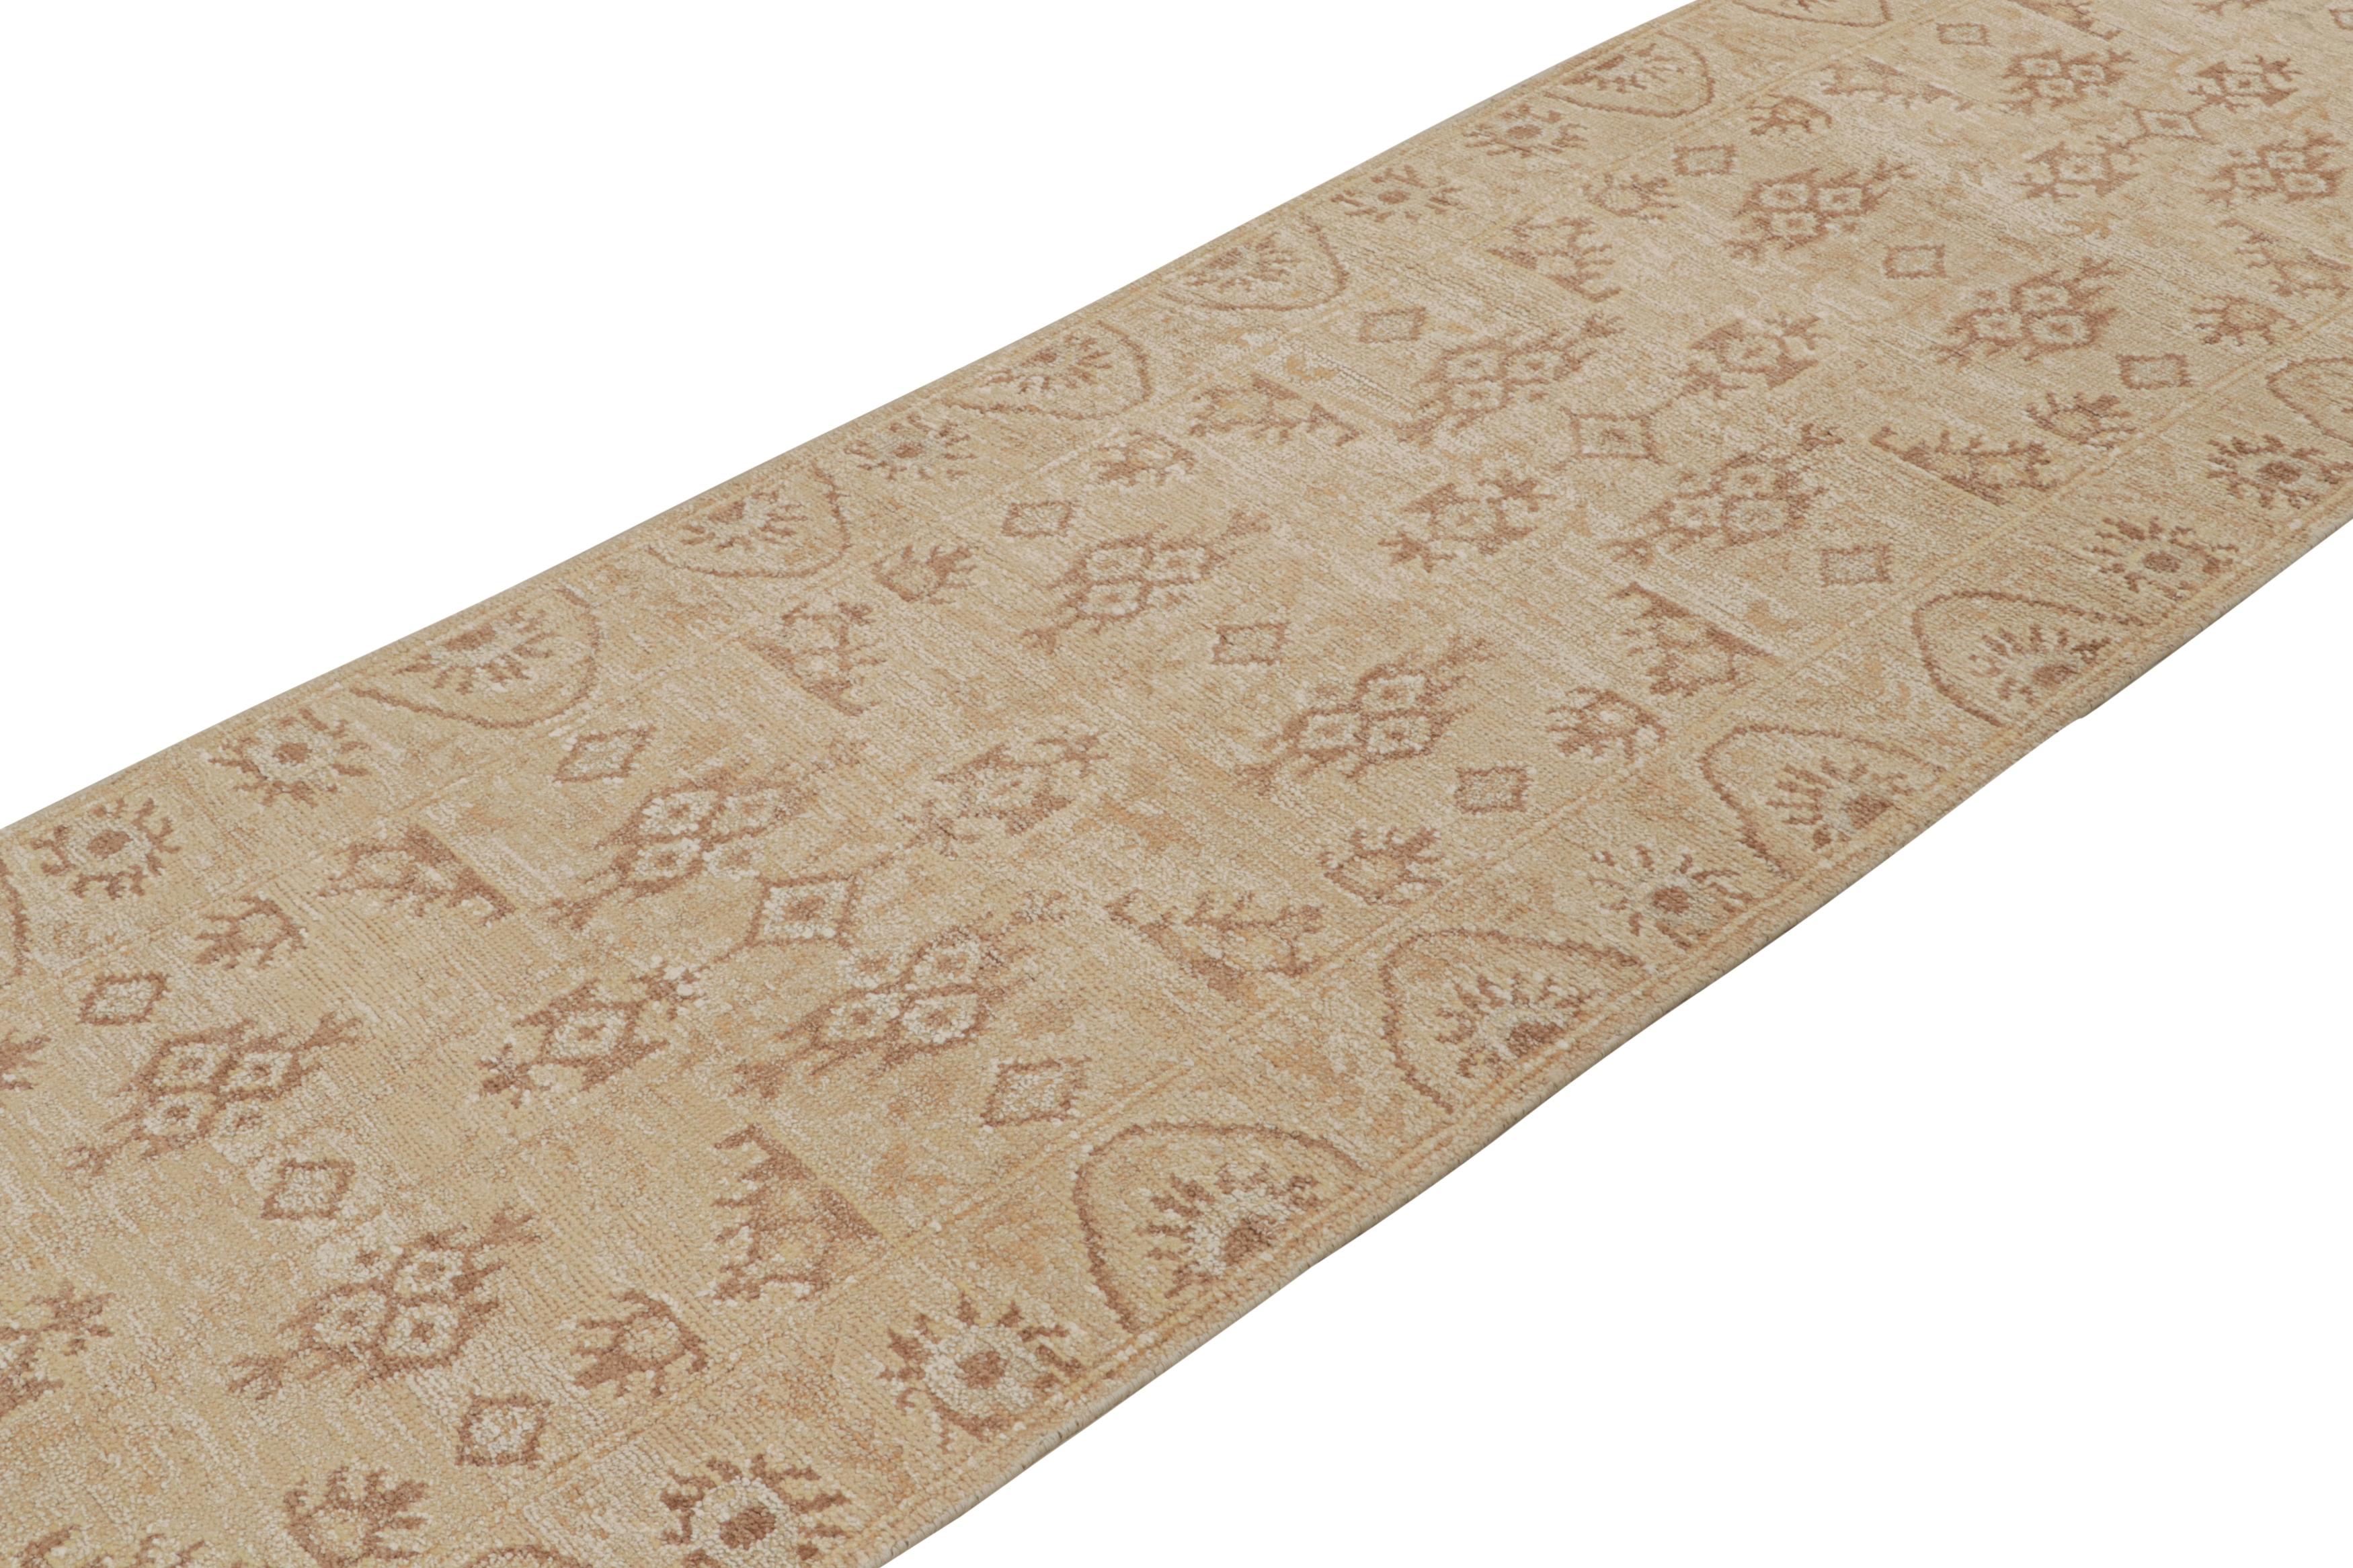 Hand-Knotted Rug & Kilim’s Oushak Style Rug in Beige-Brown Floral Pattern For Sale